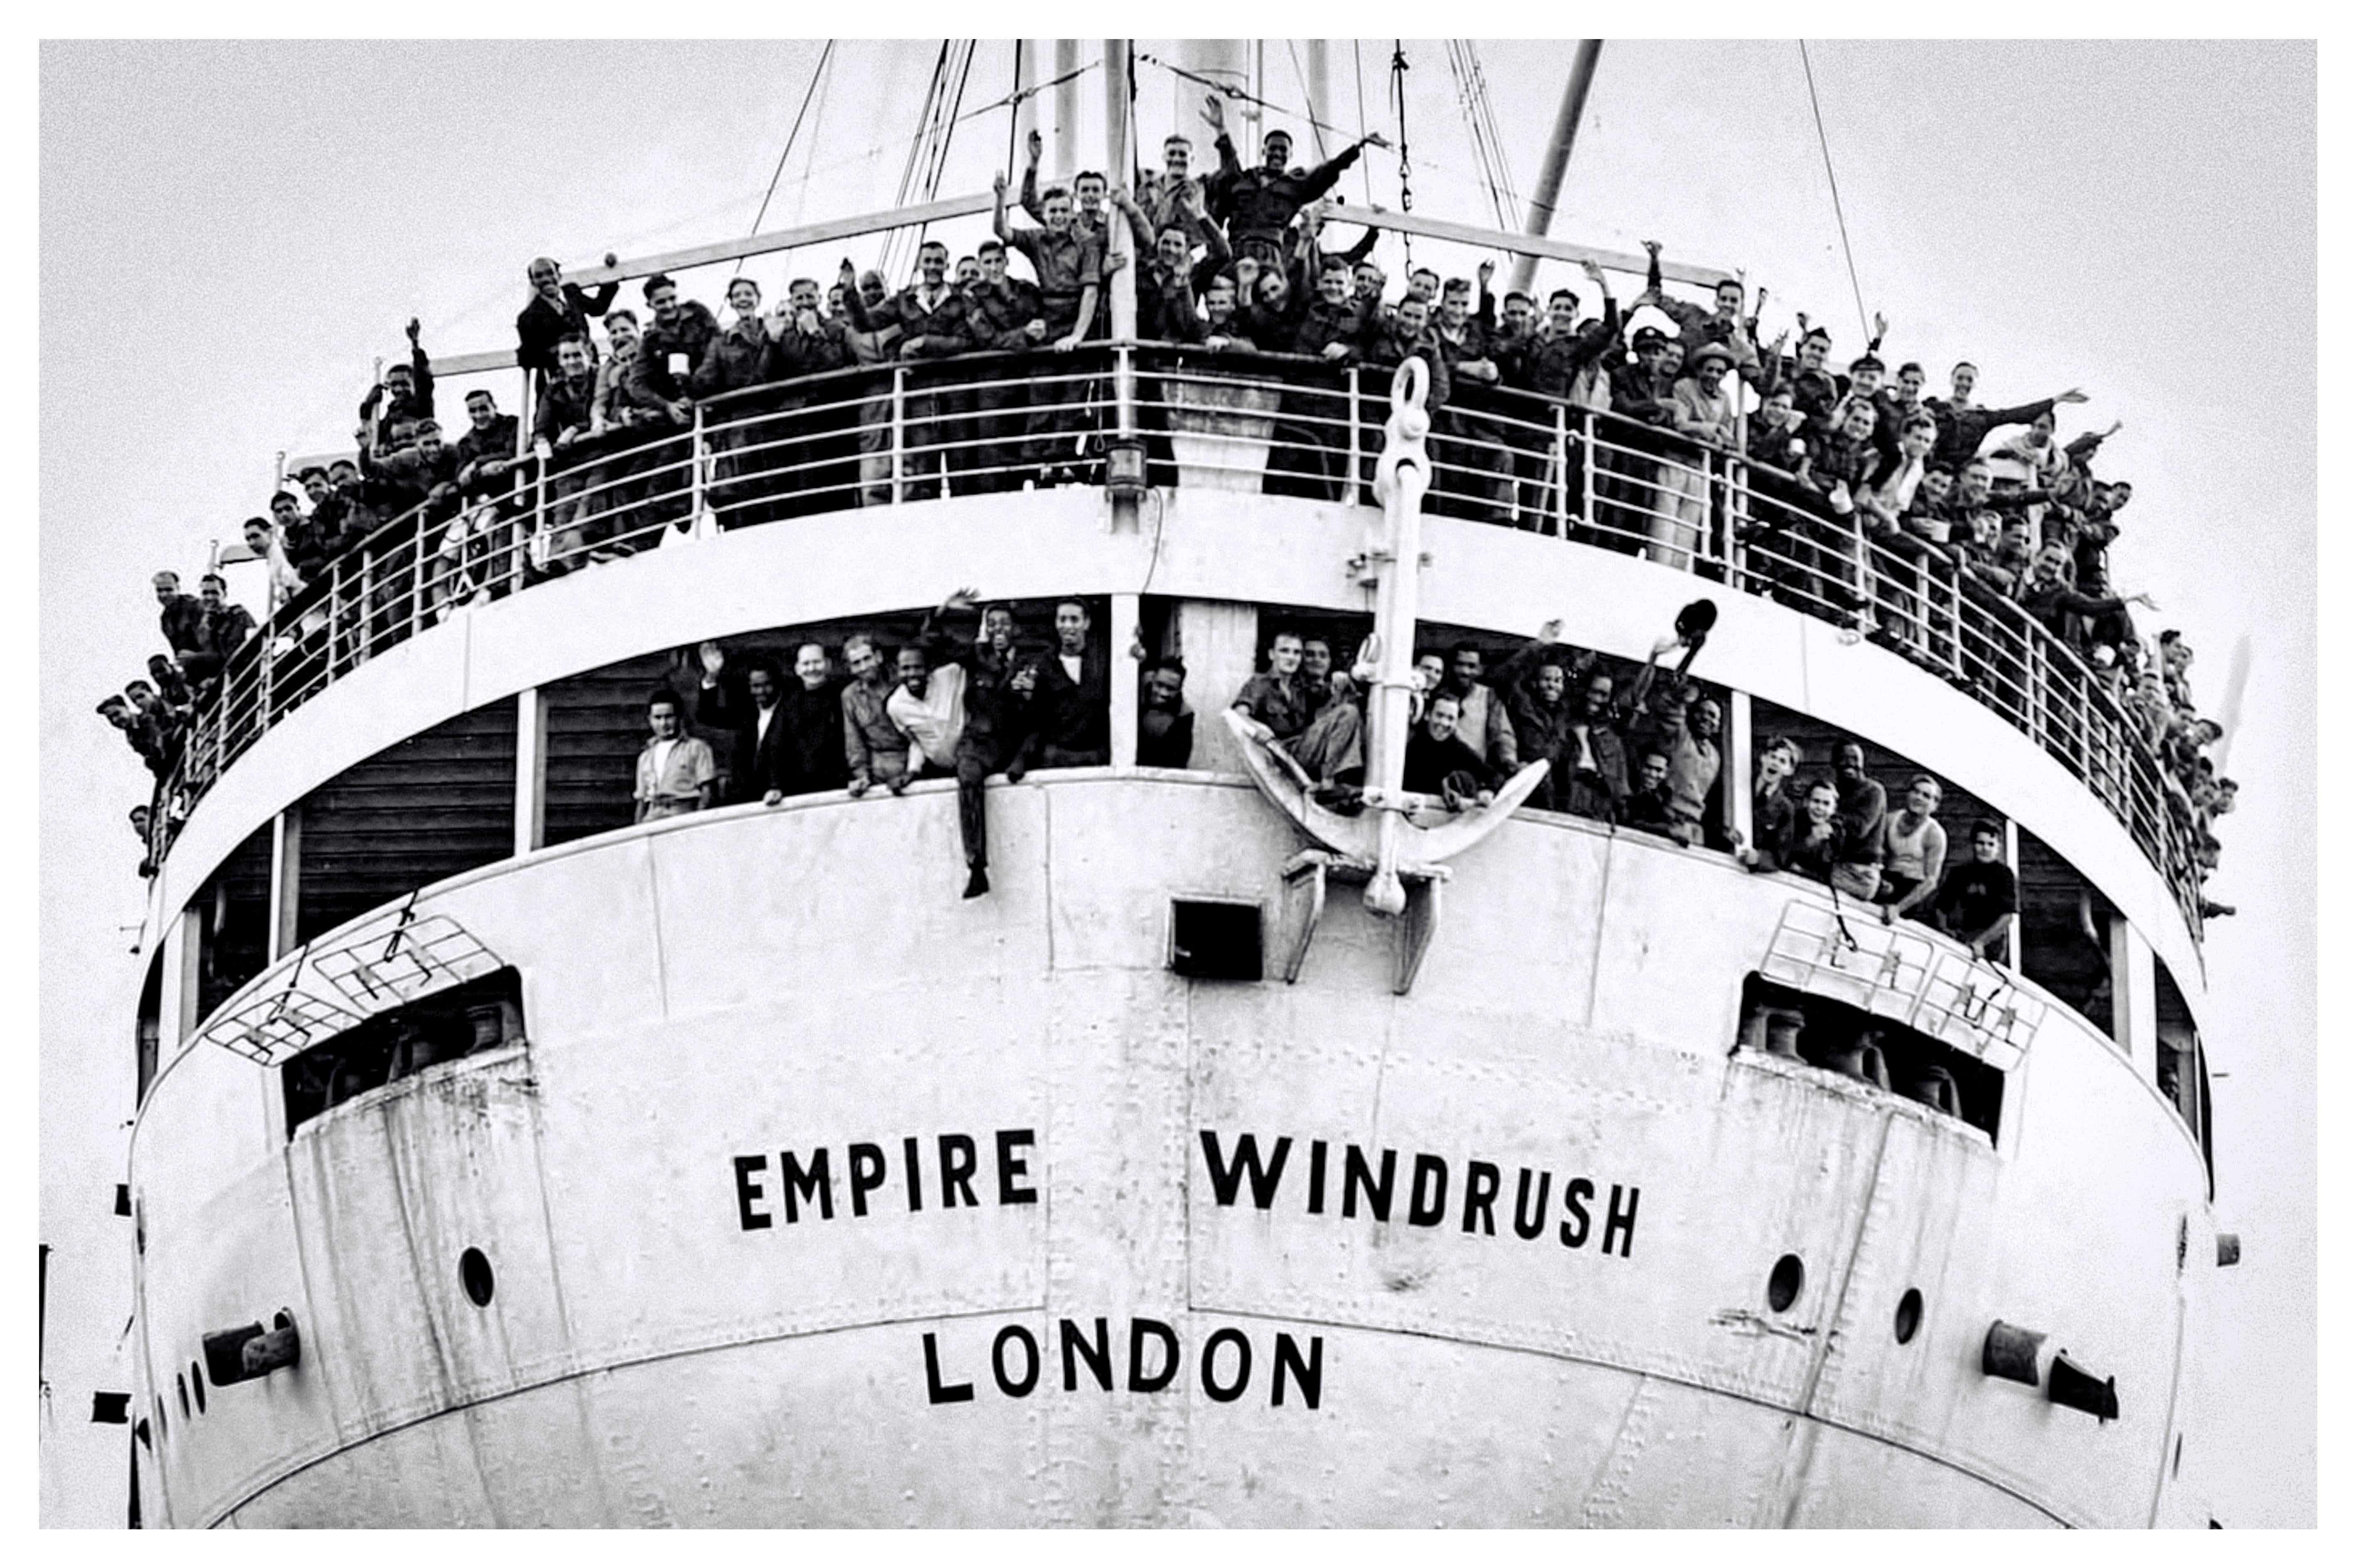 Empire Windrush packed with West Indian immigrants on arrival at the Port of Tilbury on the River Thames on 22 June 1948. This event is often cited as the start of the postwar immigration boom that was to change British society forever. The British Nationality Act 1948 gave British citizenship to all people living in Commonwealth countries with full rights of entry and settlement in Britain.